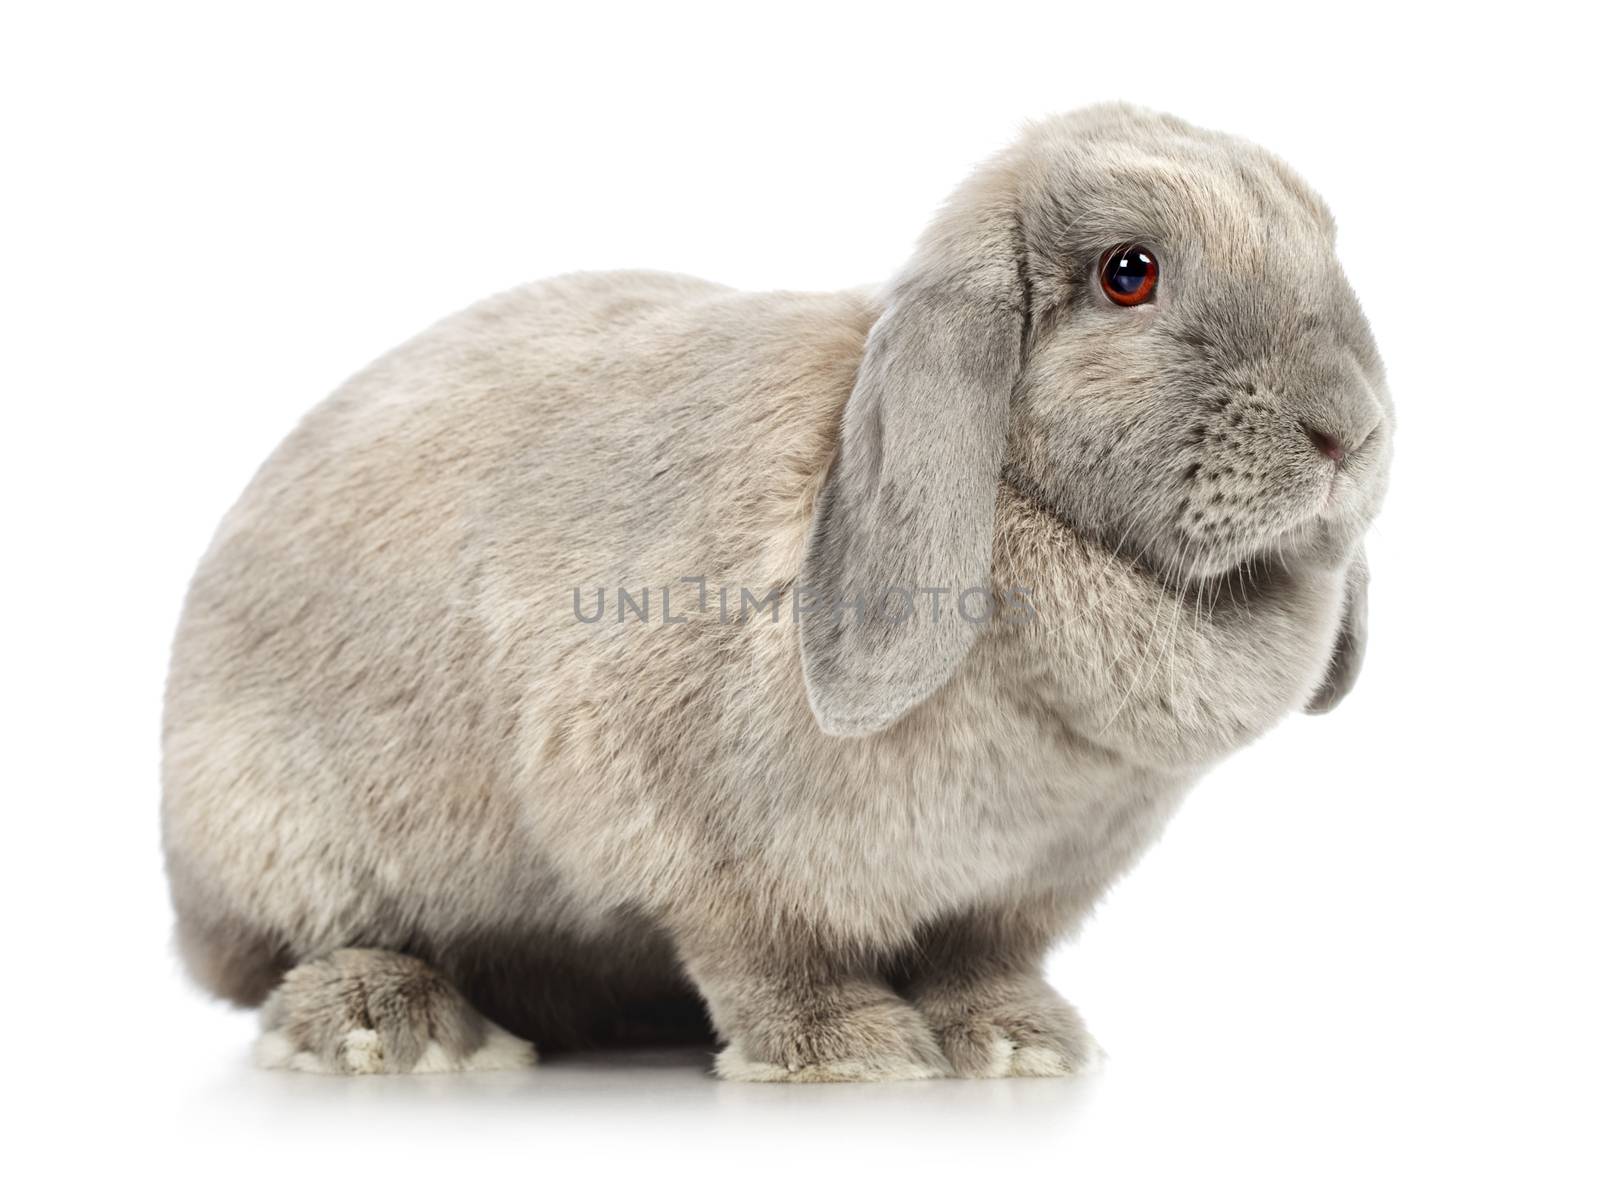 gray lop-earred rabbit, isolated on white background